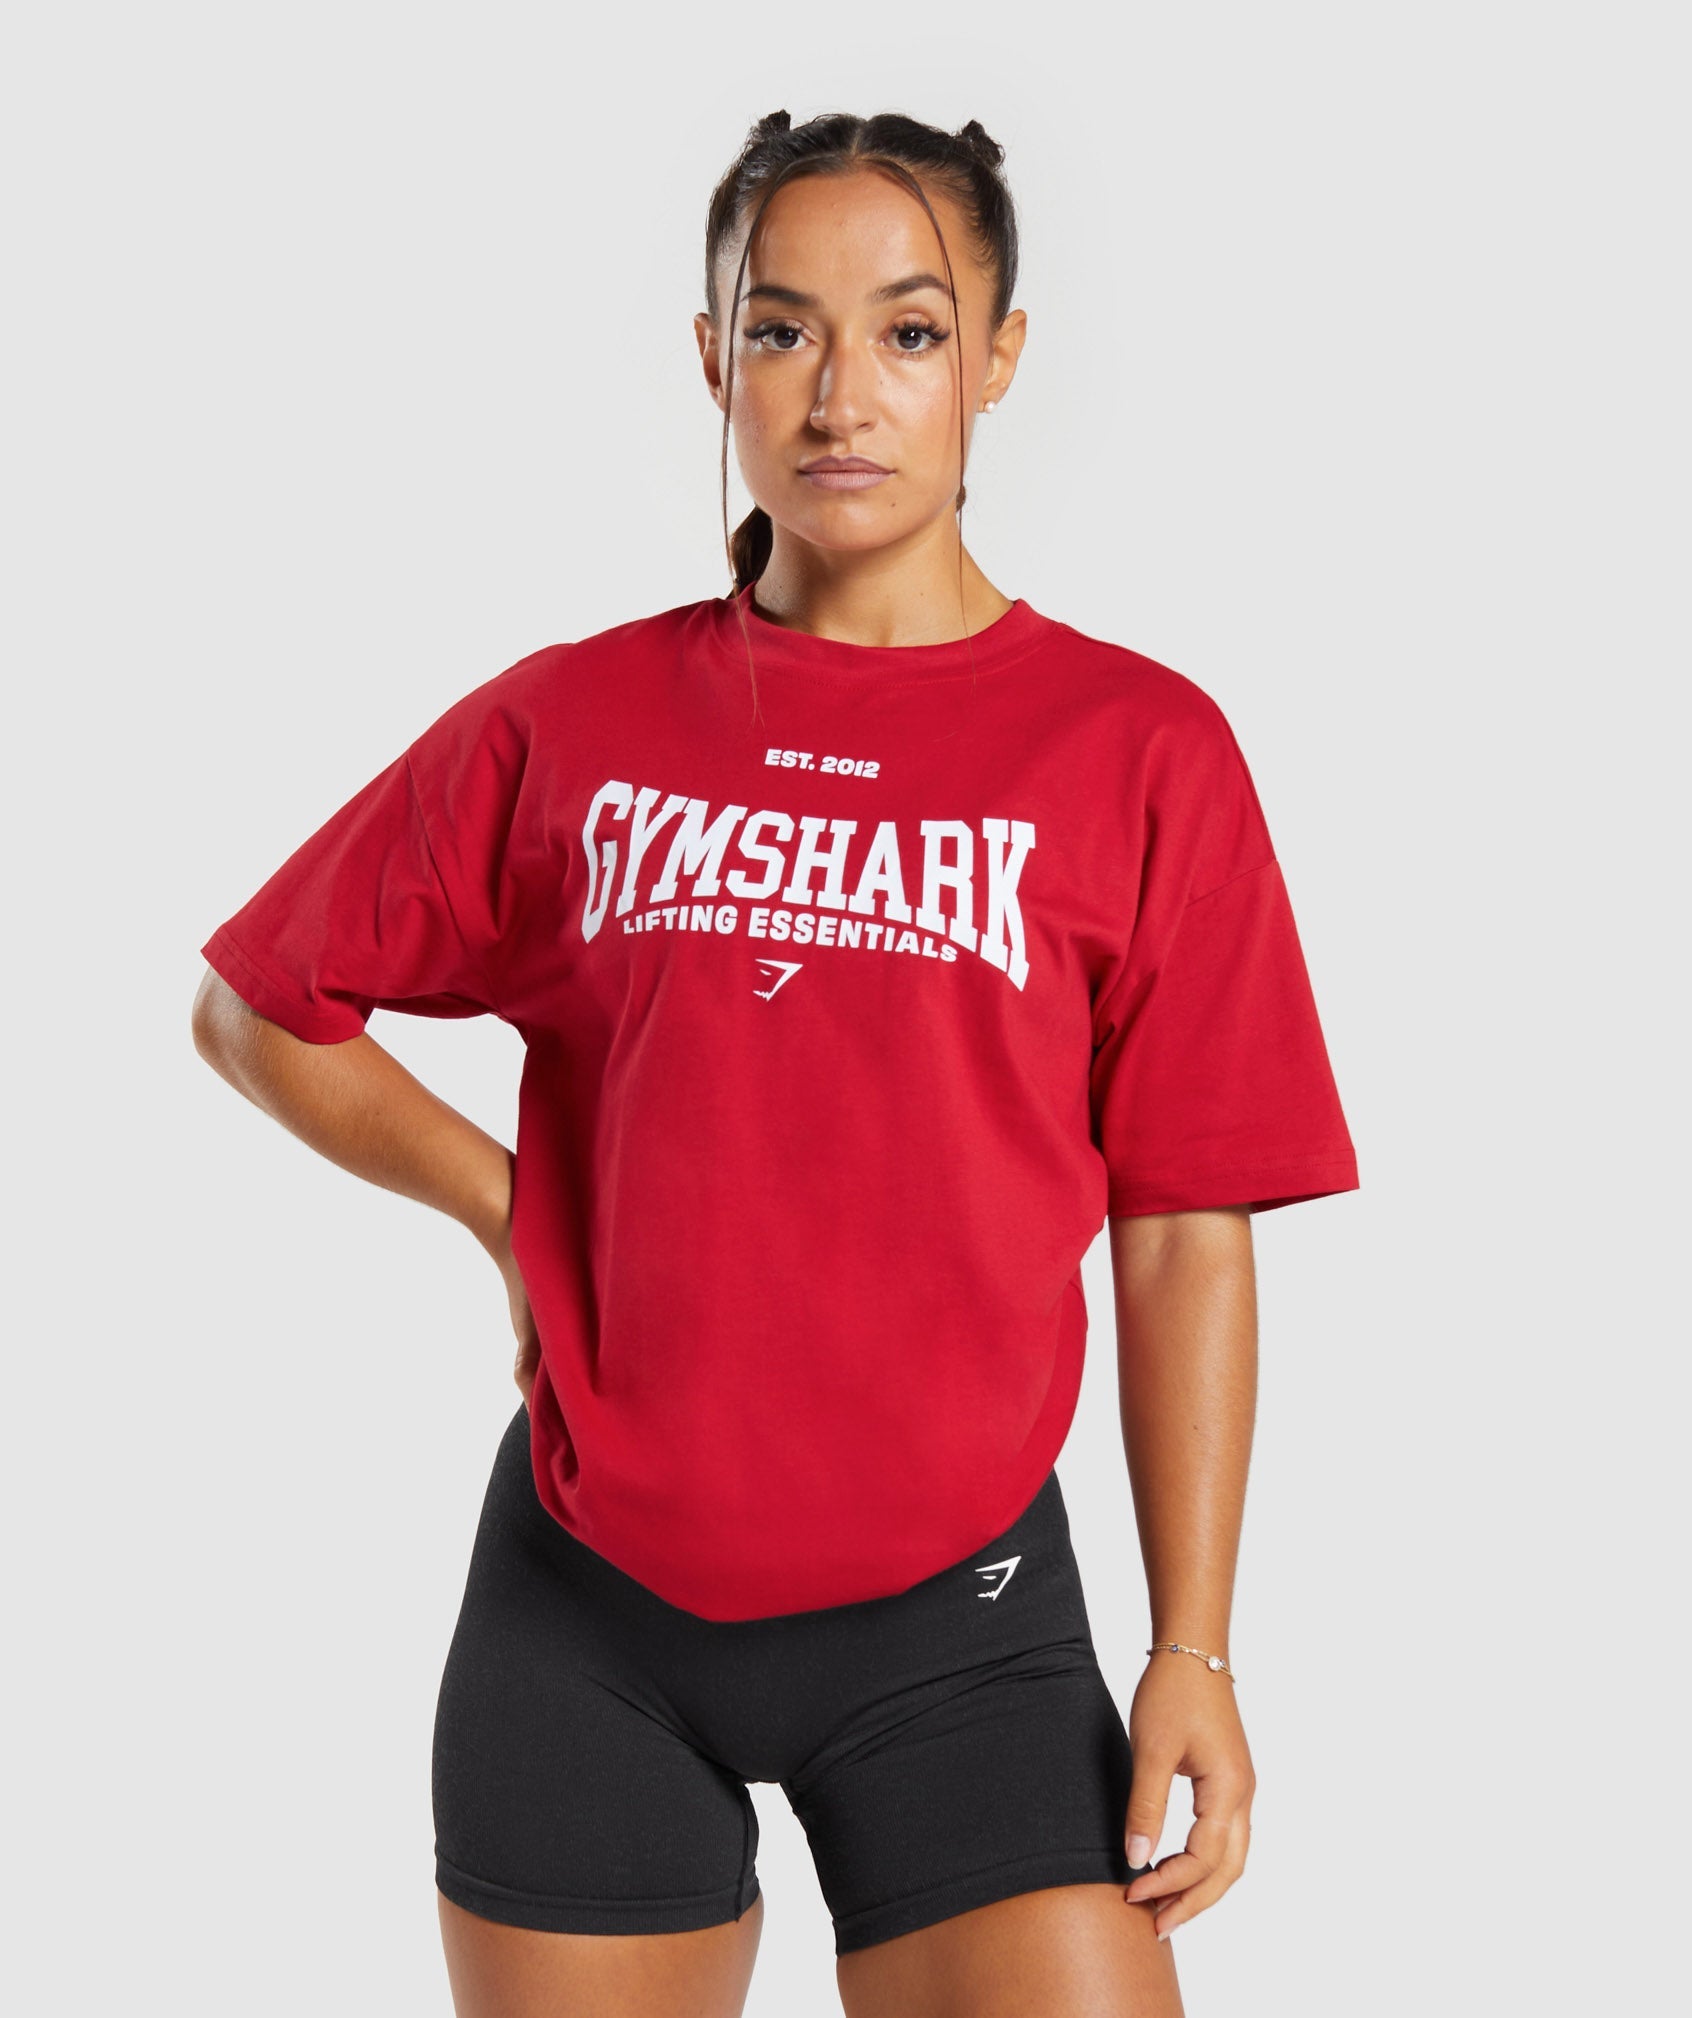 Lifting Essentials Oversized T-shirt in Carmine Red is out of stock